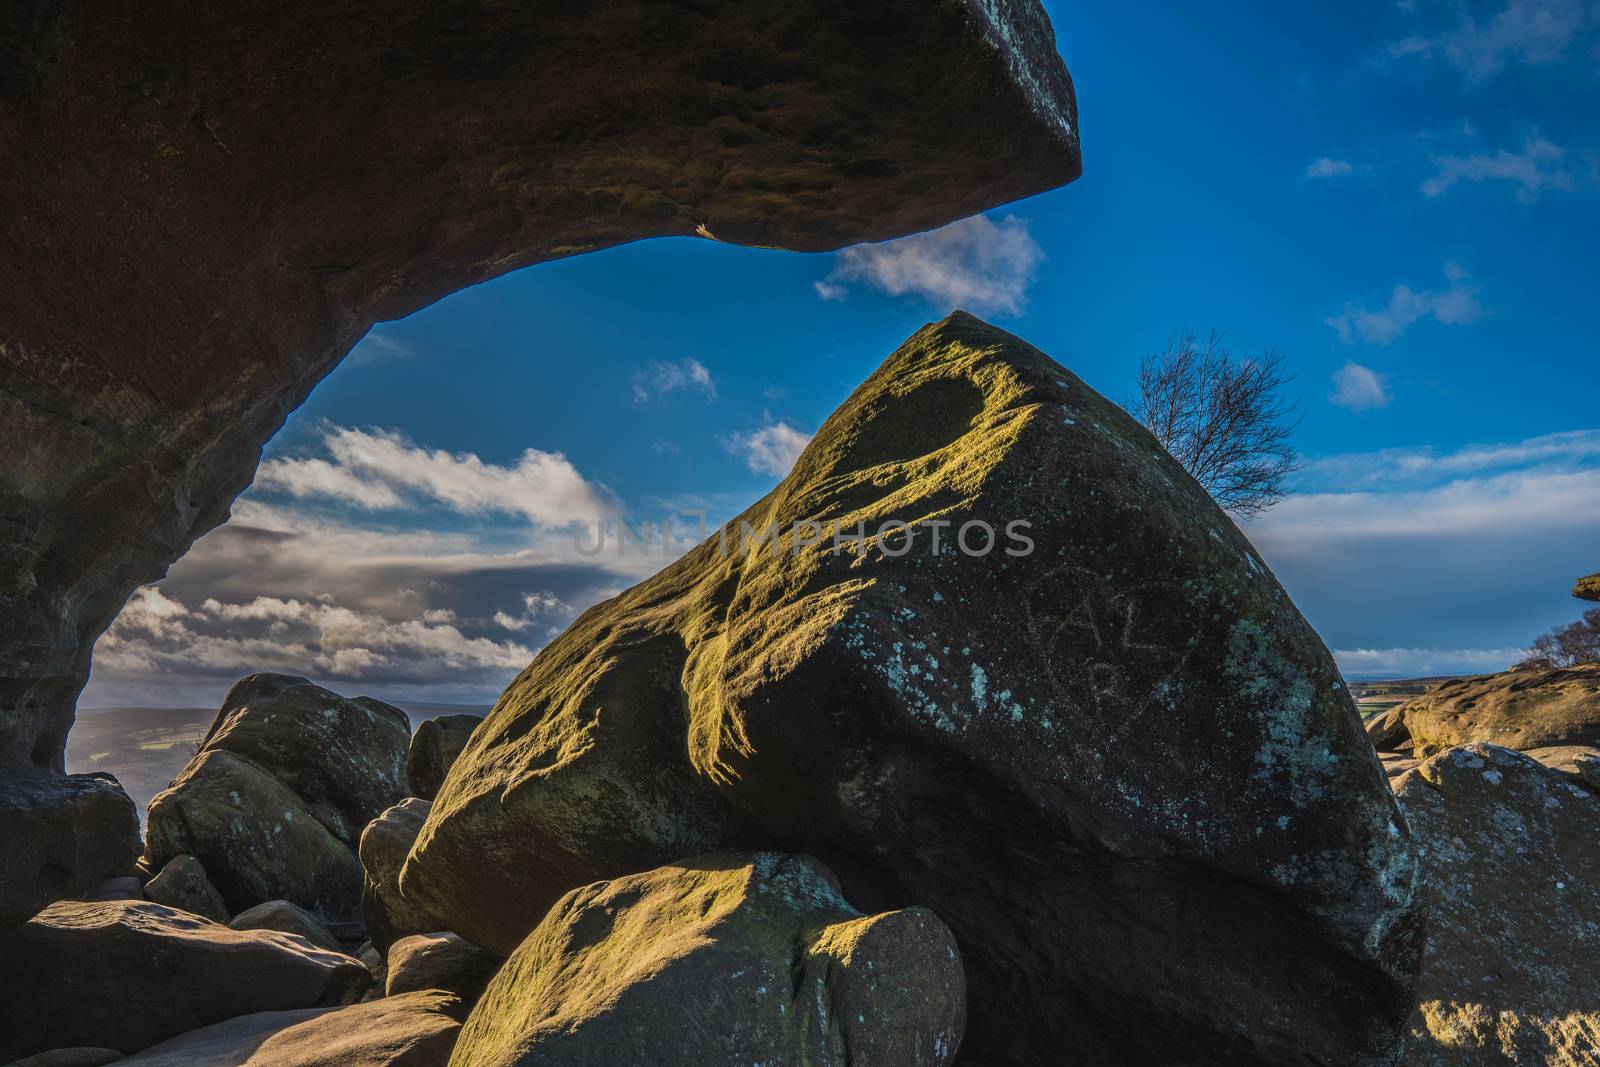 Brimham Rocks in North Yorkshire by samULvisuals